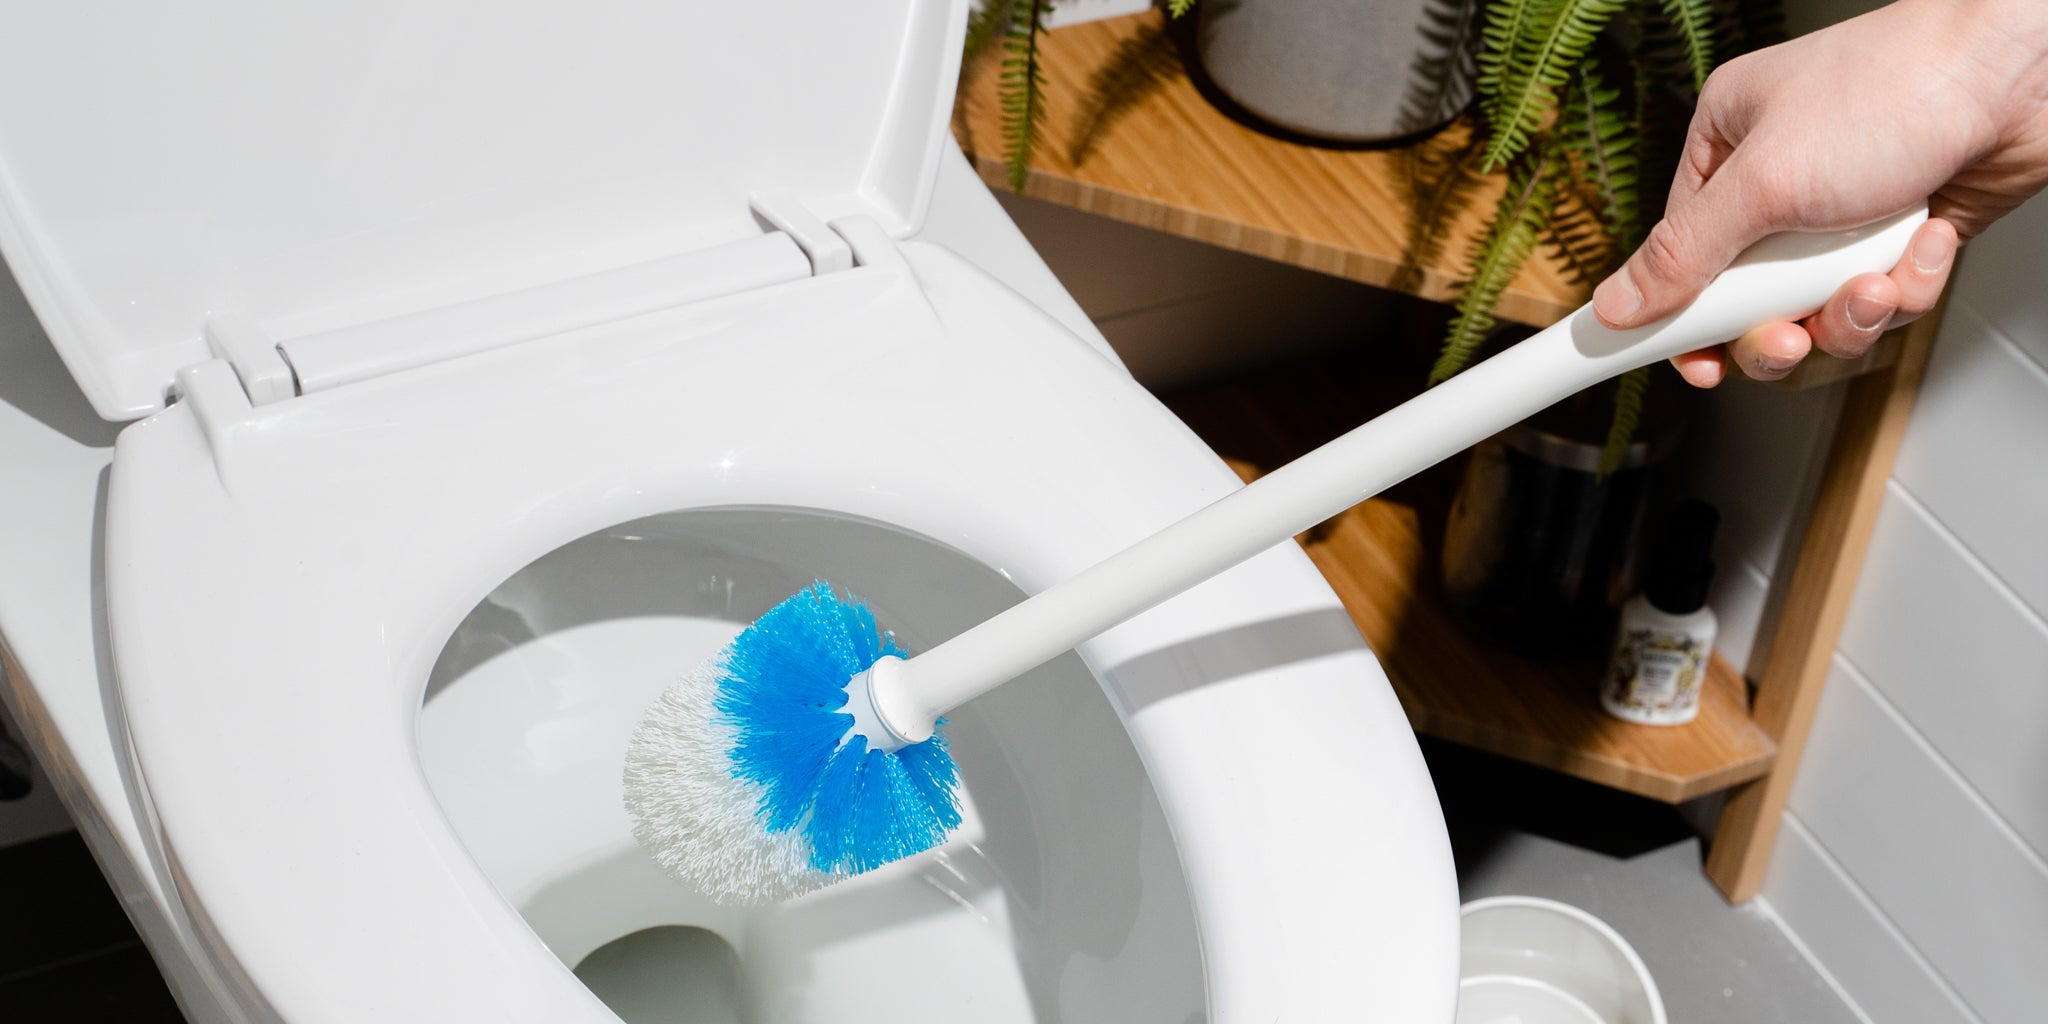 5 bathroom cleaning hacks that don't work – and what to try instead